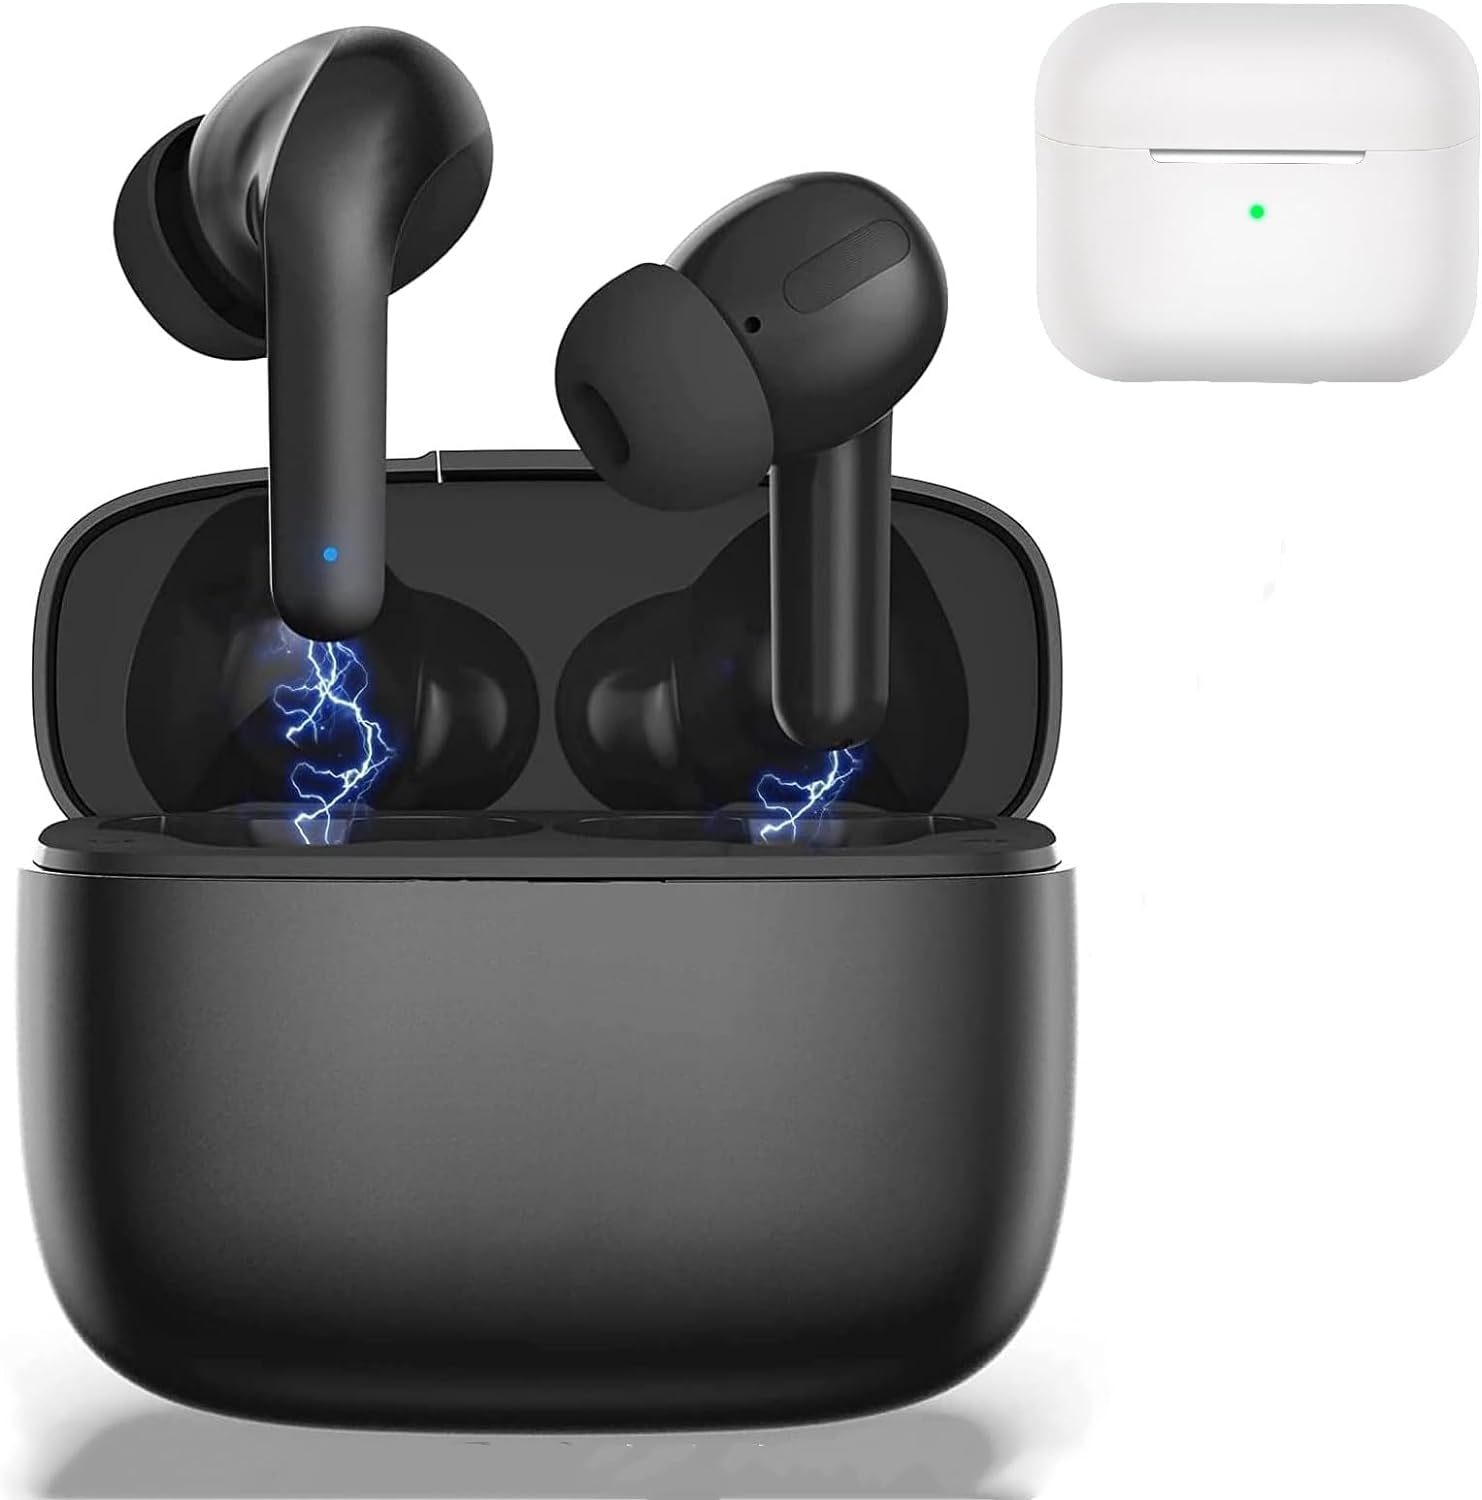 Wireless Earbuds,Bluetooth5.2 Earbuds Automatic Noise Reduction in-Ear Earbuds Touch Control Pop-ups Auto Pairing with Charging case for iPhone/airpod prO [MFi Certified] Android/Samsung-Black